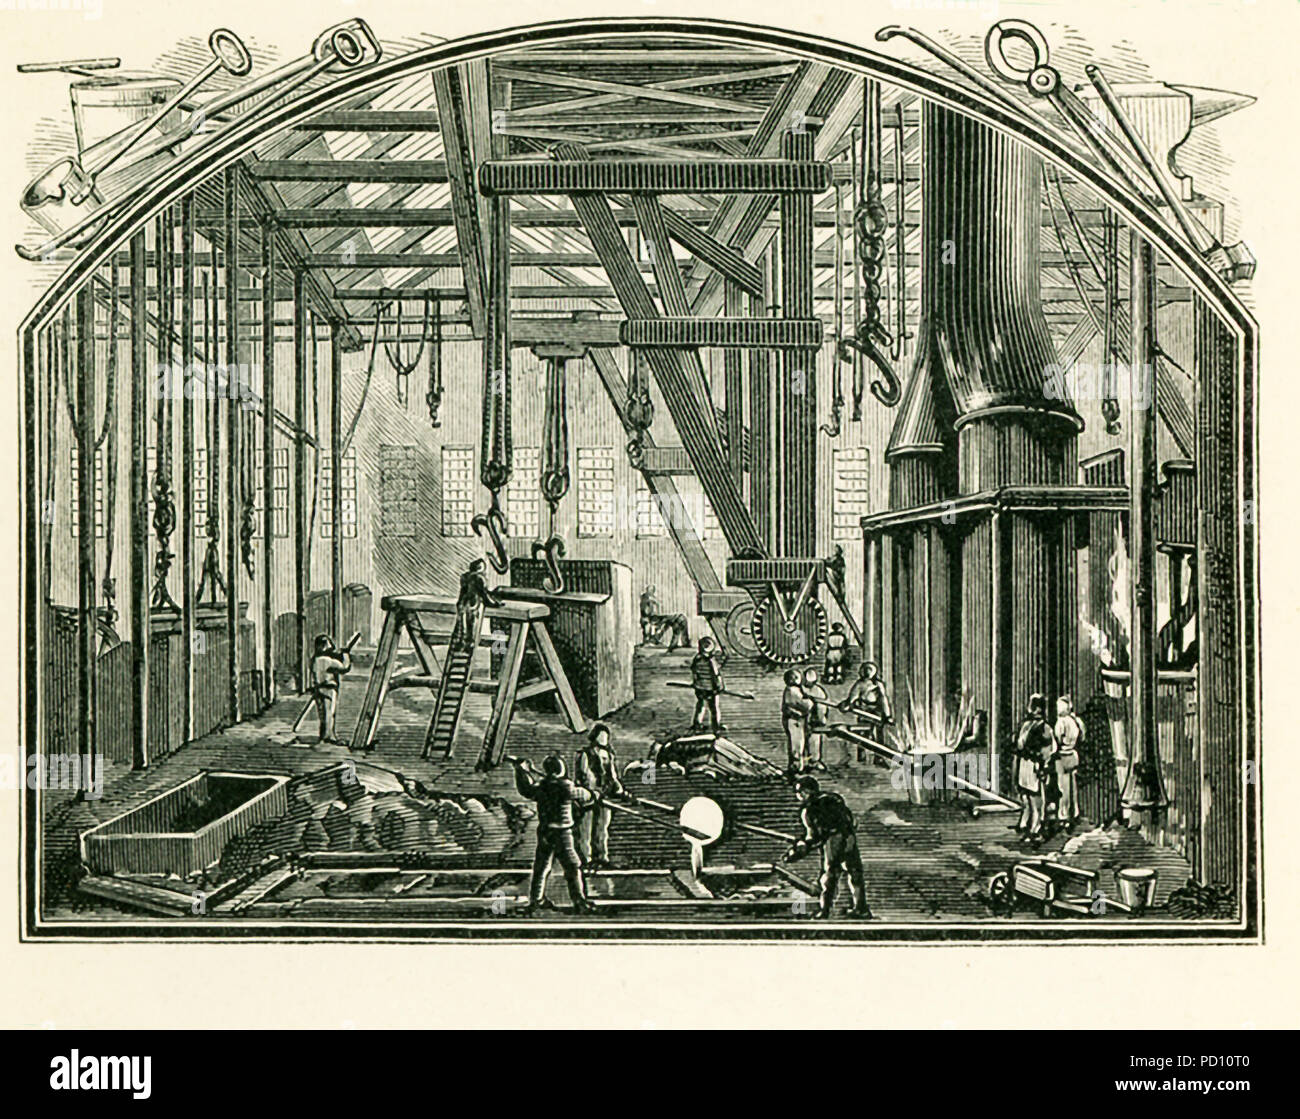 This illustration dates to the 1870s and shows a foundry, a workshop or factory for casting metal, in England in the 1870s. Stock Photo